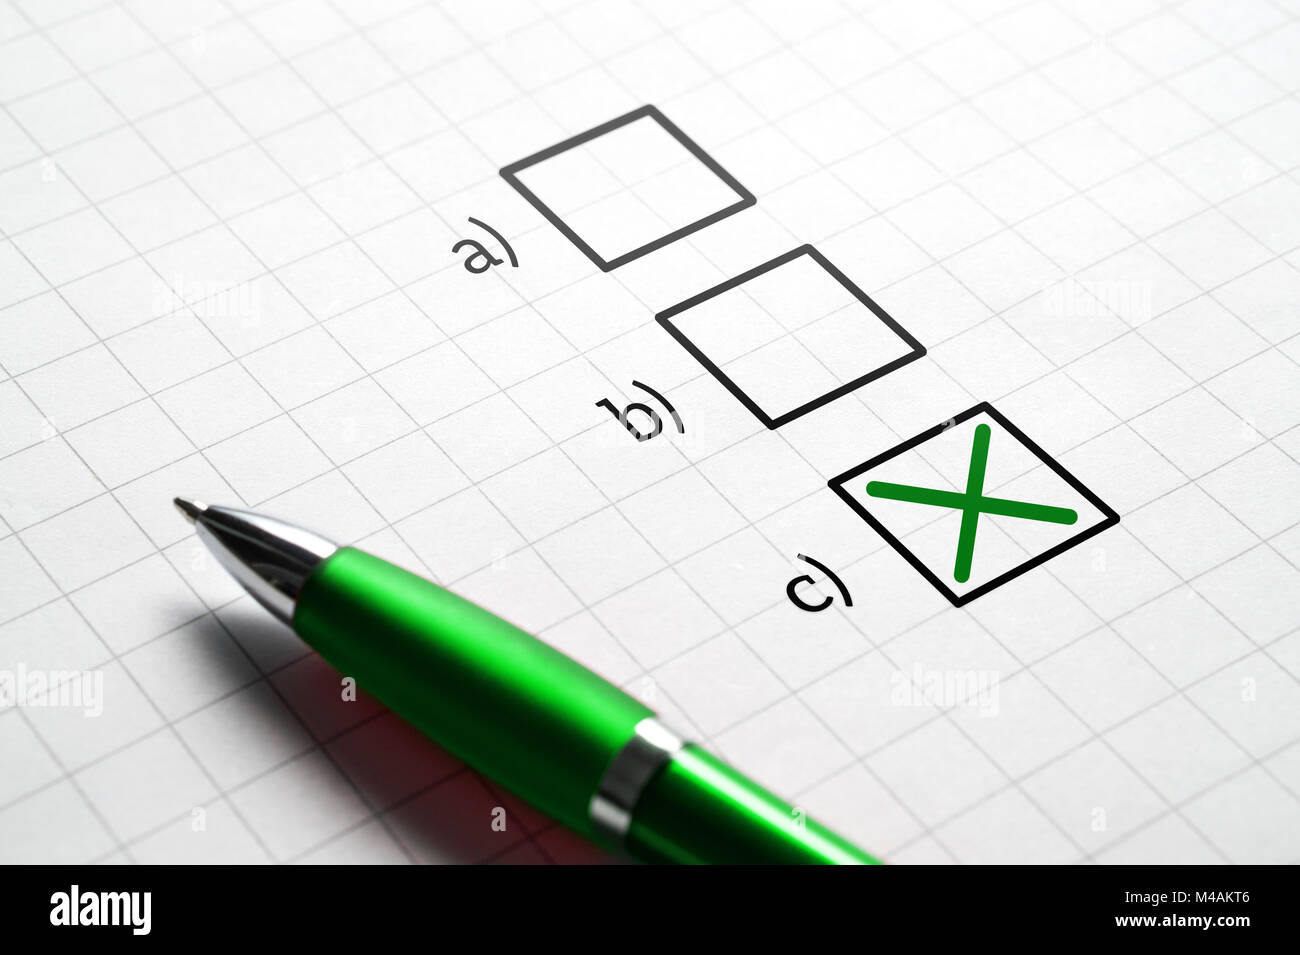 Plan C. Making decision and choice. Exam in school or answering to multiple choice question. Change of plan. Stock Photo